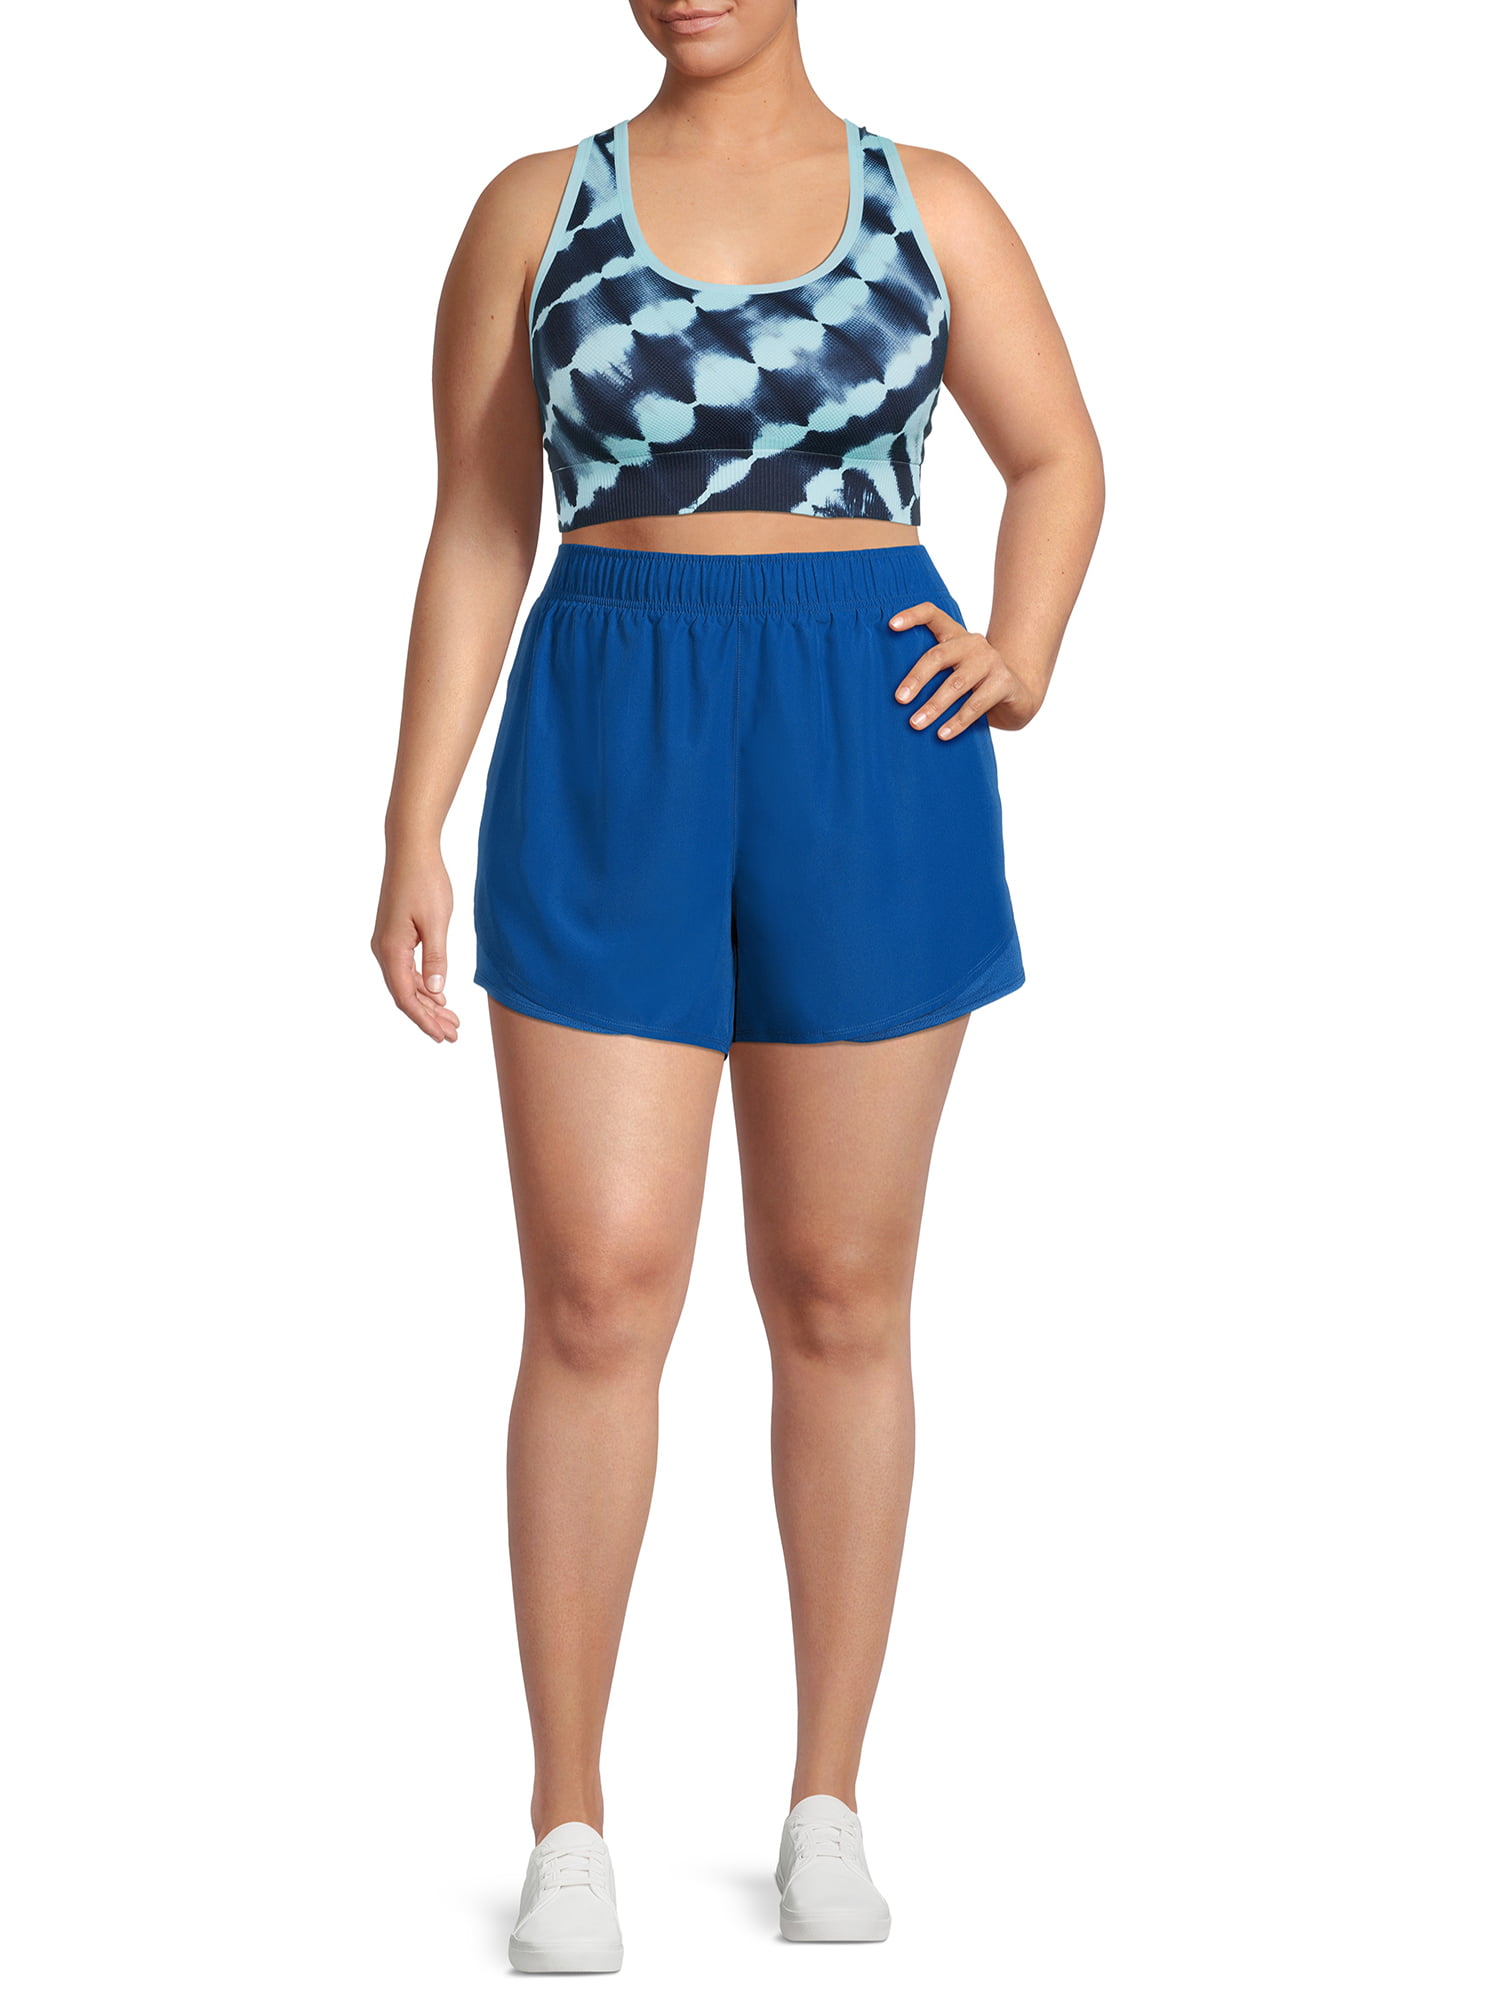 My all time favorite plus size athletic shorts!! #plussizeathleticwear, athletic shorts plus size